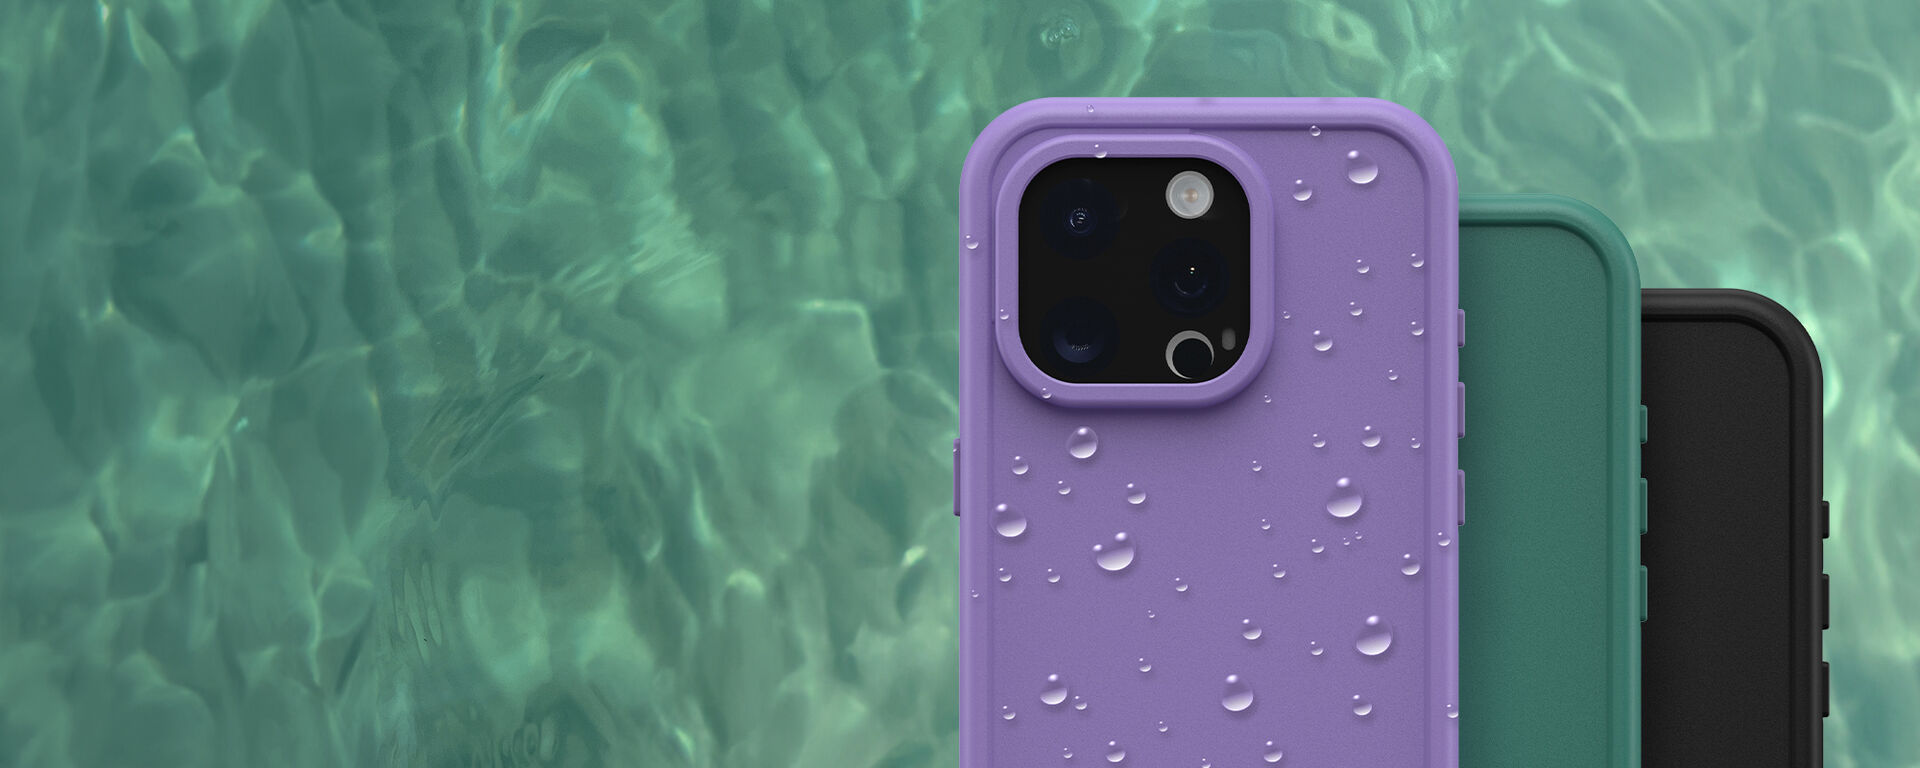 Say Hello to Frē waterproof case